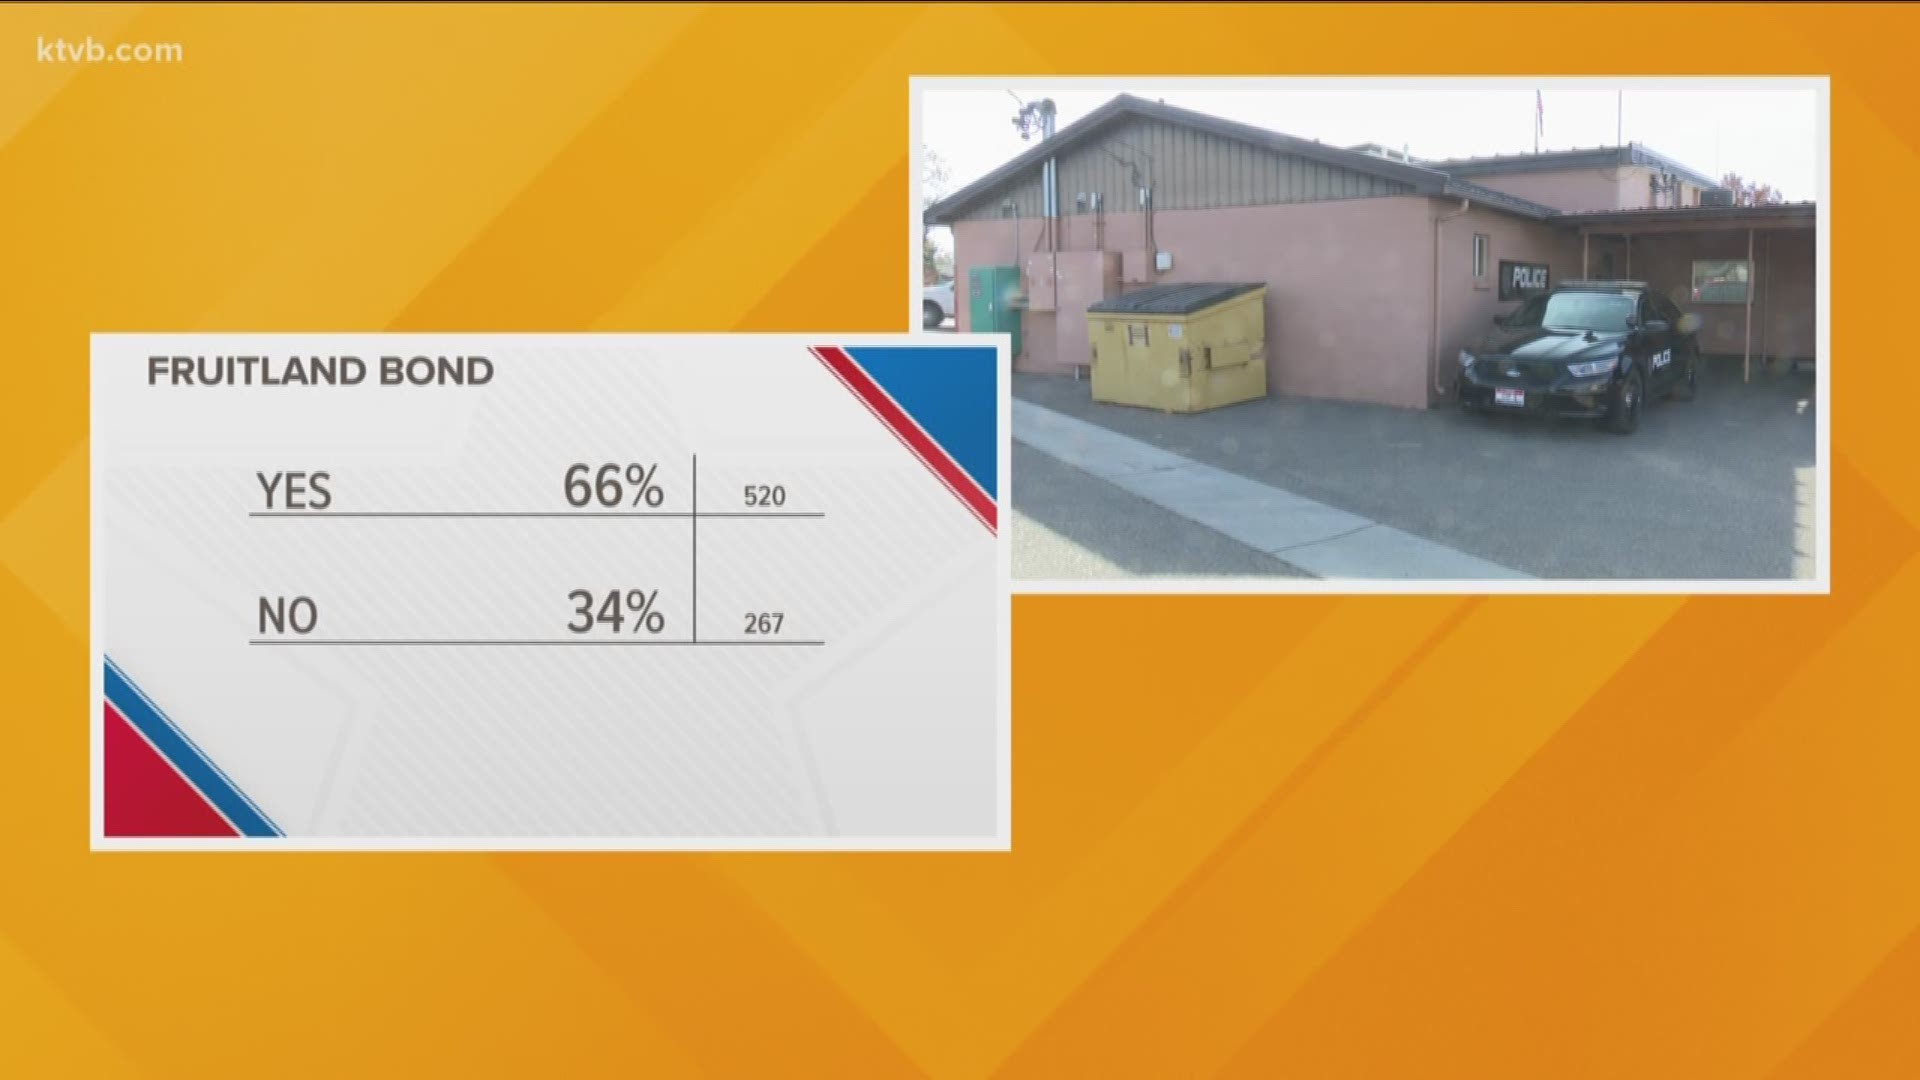 The bond vote came up just short of the two-thirds majority needed for passage.